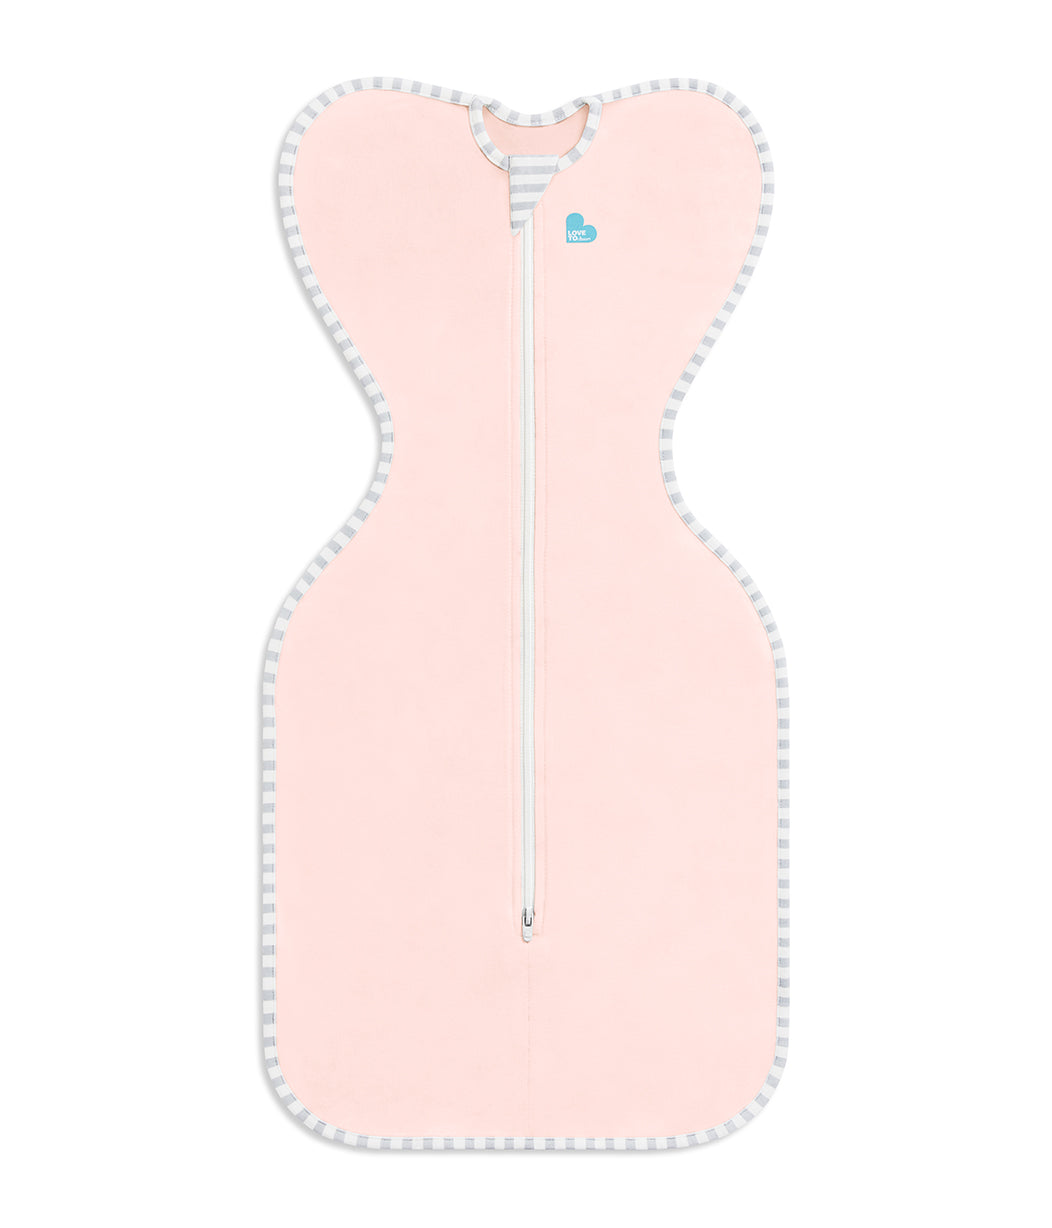 SWADDLE UP LITE 0.2 TOG LIGHT PINK Love To Dream South Africa